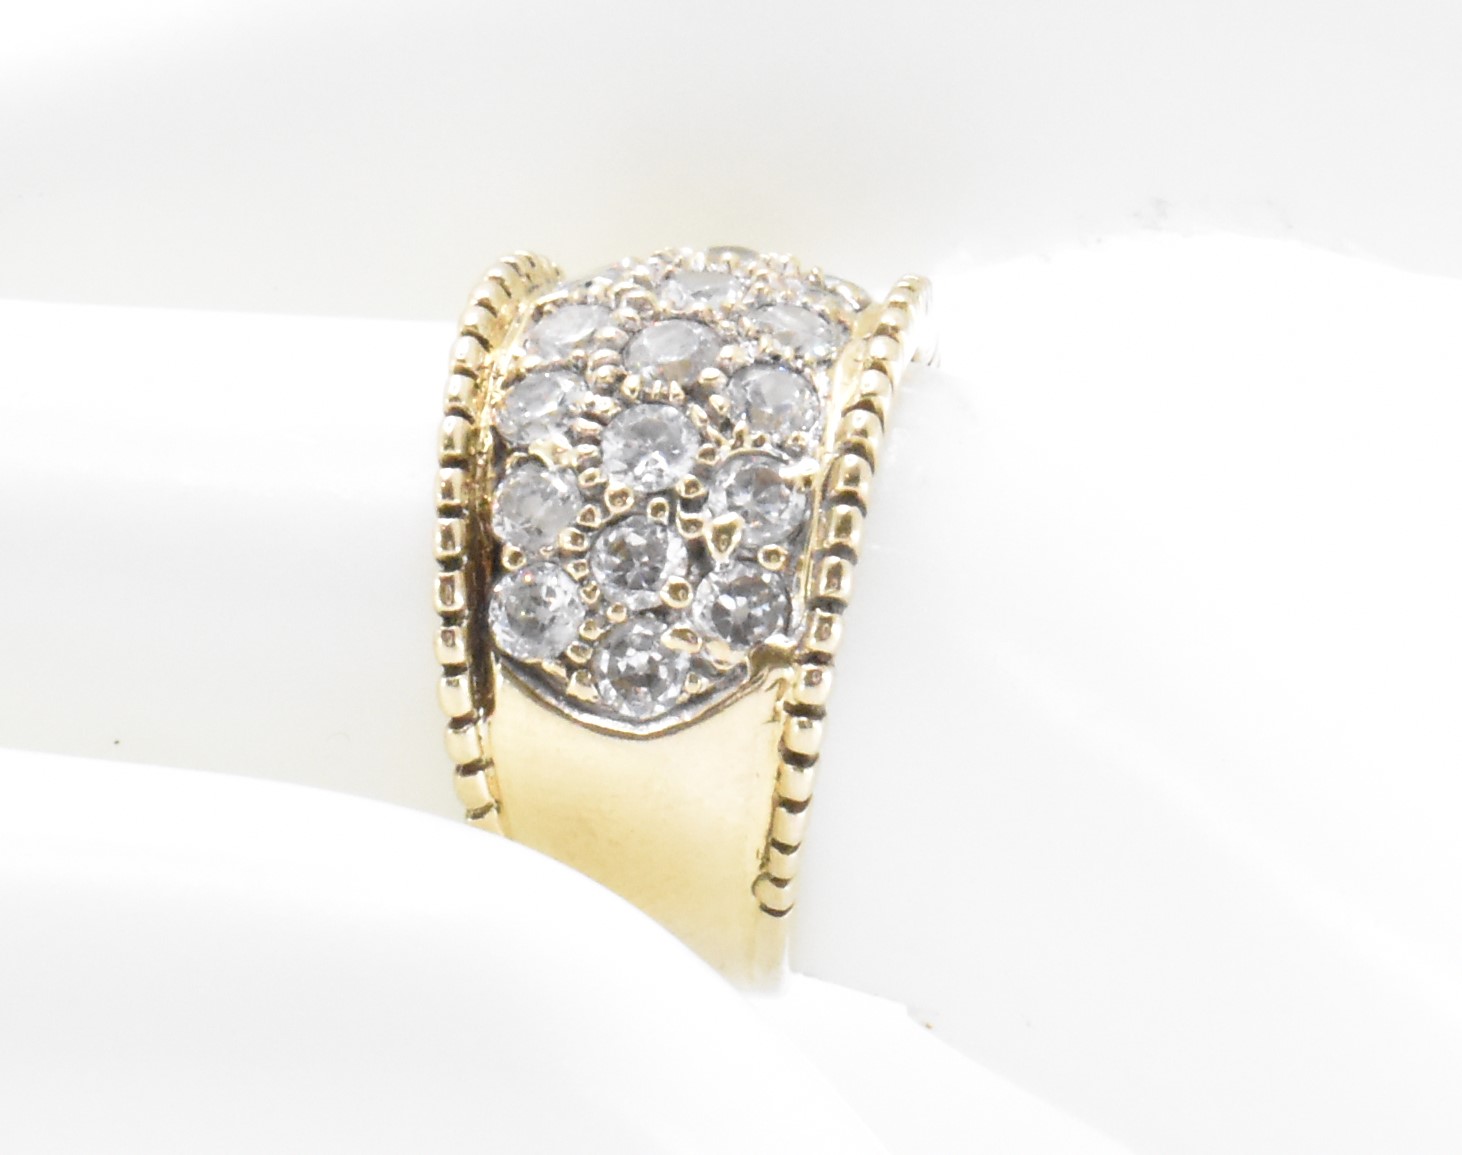 9CT GOLD & WHITE STONE RING - Image 5 of 6